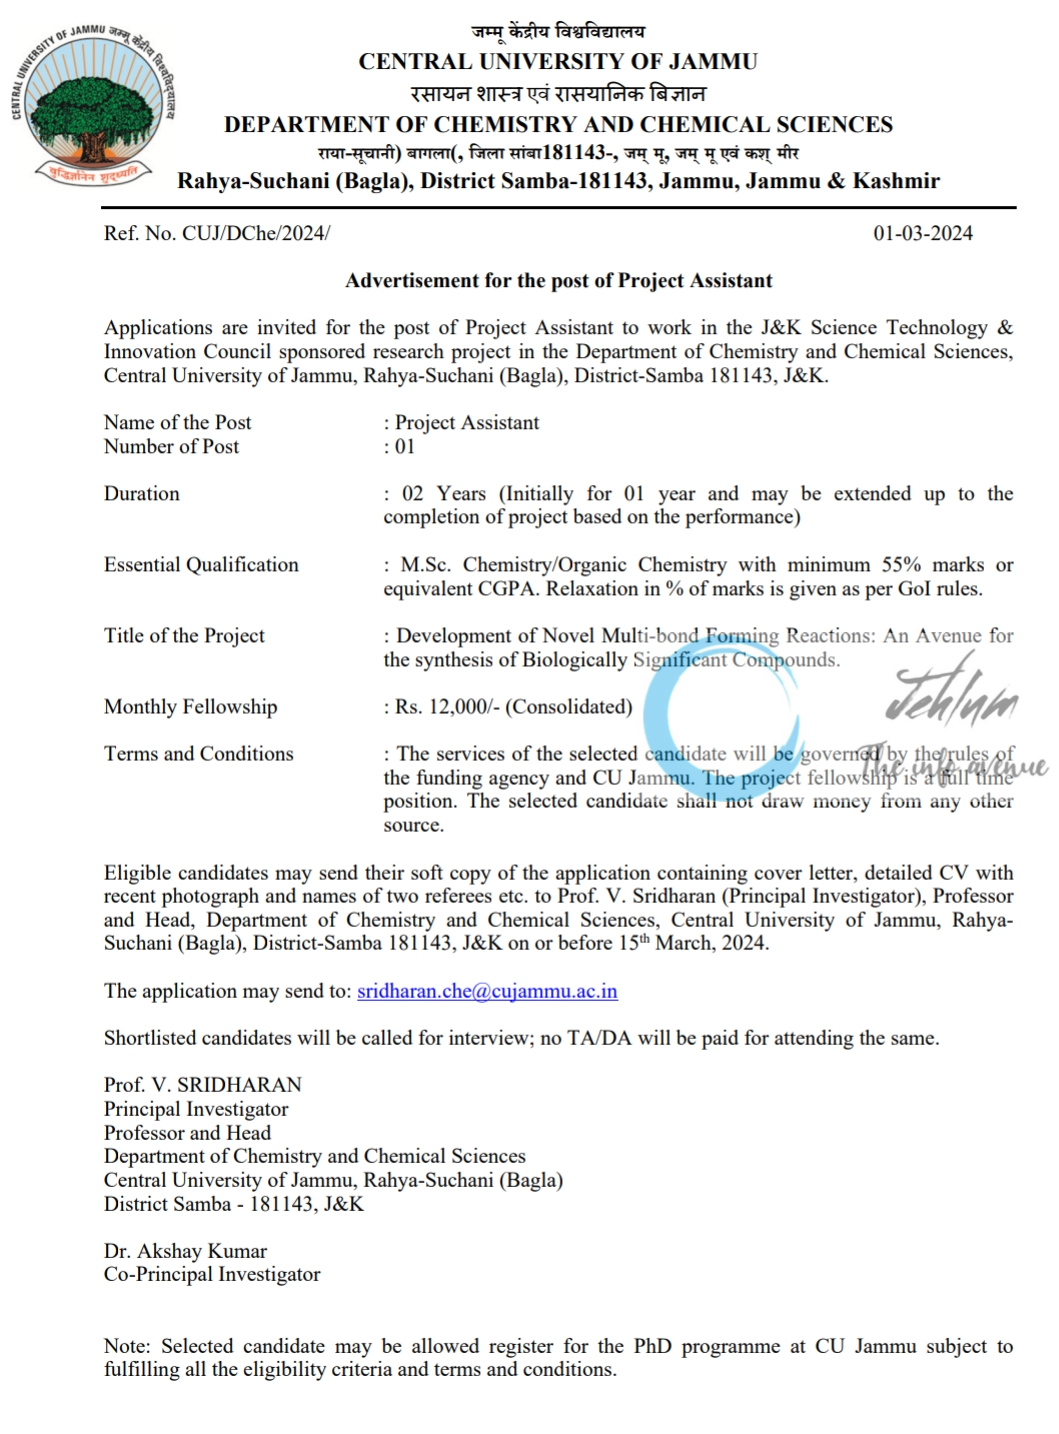 CENTRAL UNIVERSITY OF JAMMU DEPTT OF CHEMISTRY AND CHEMICAL SCIENCES ADVERTISEMENT NOTICE 2024